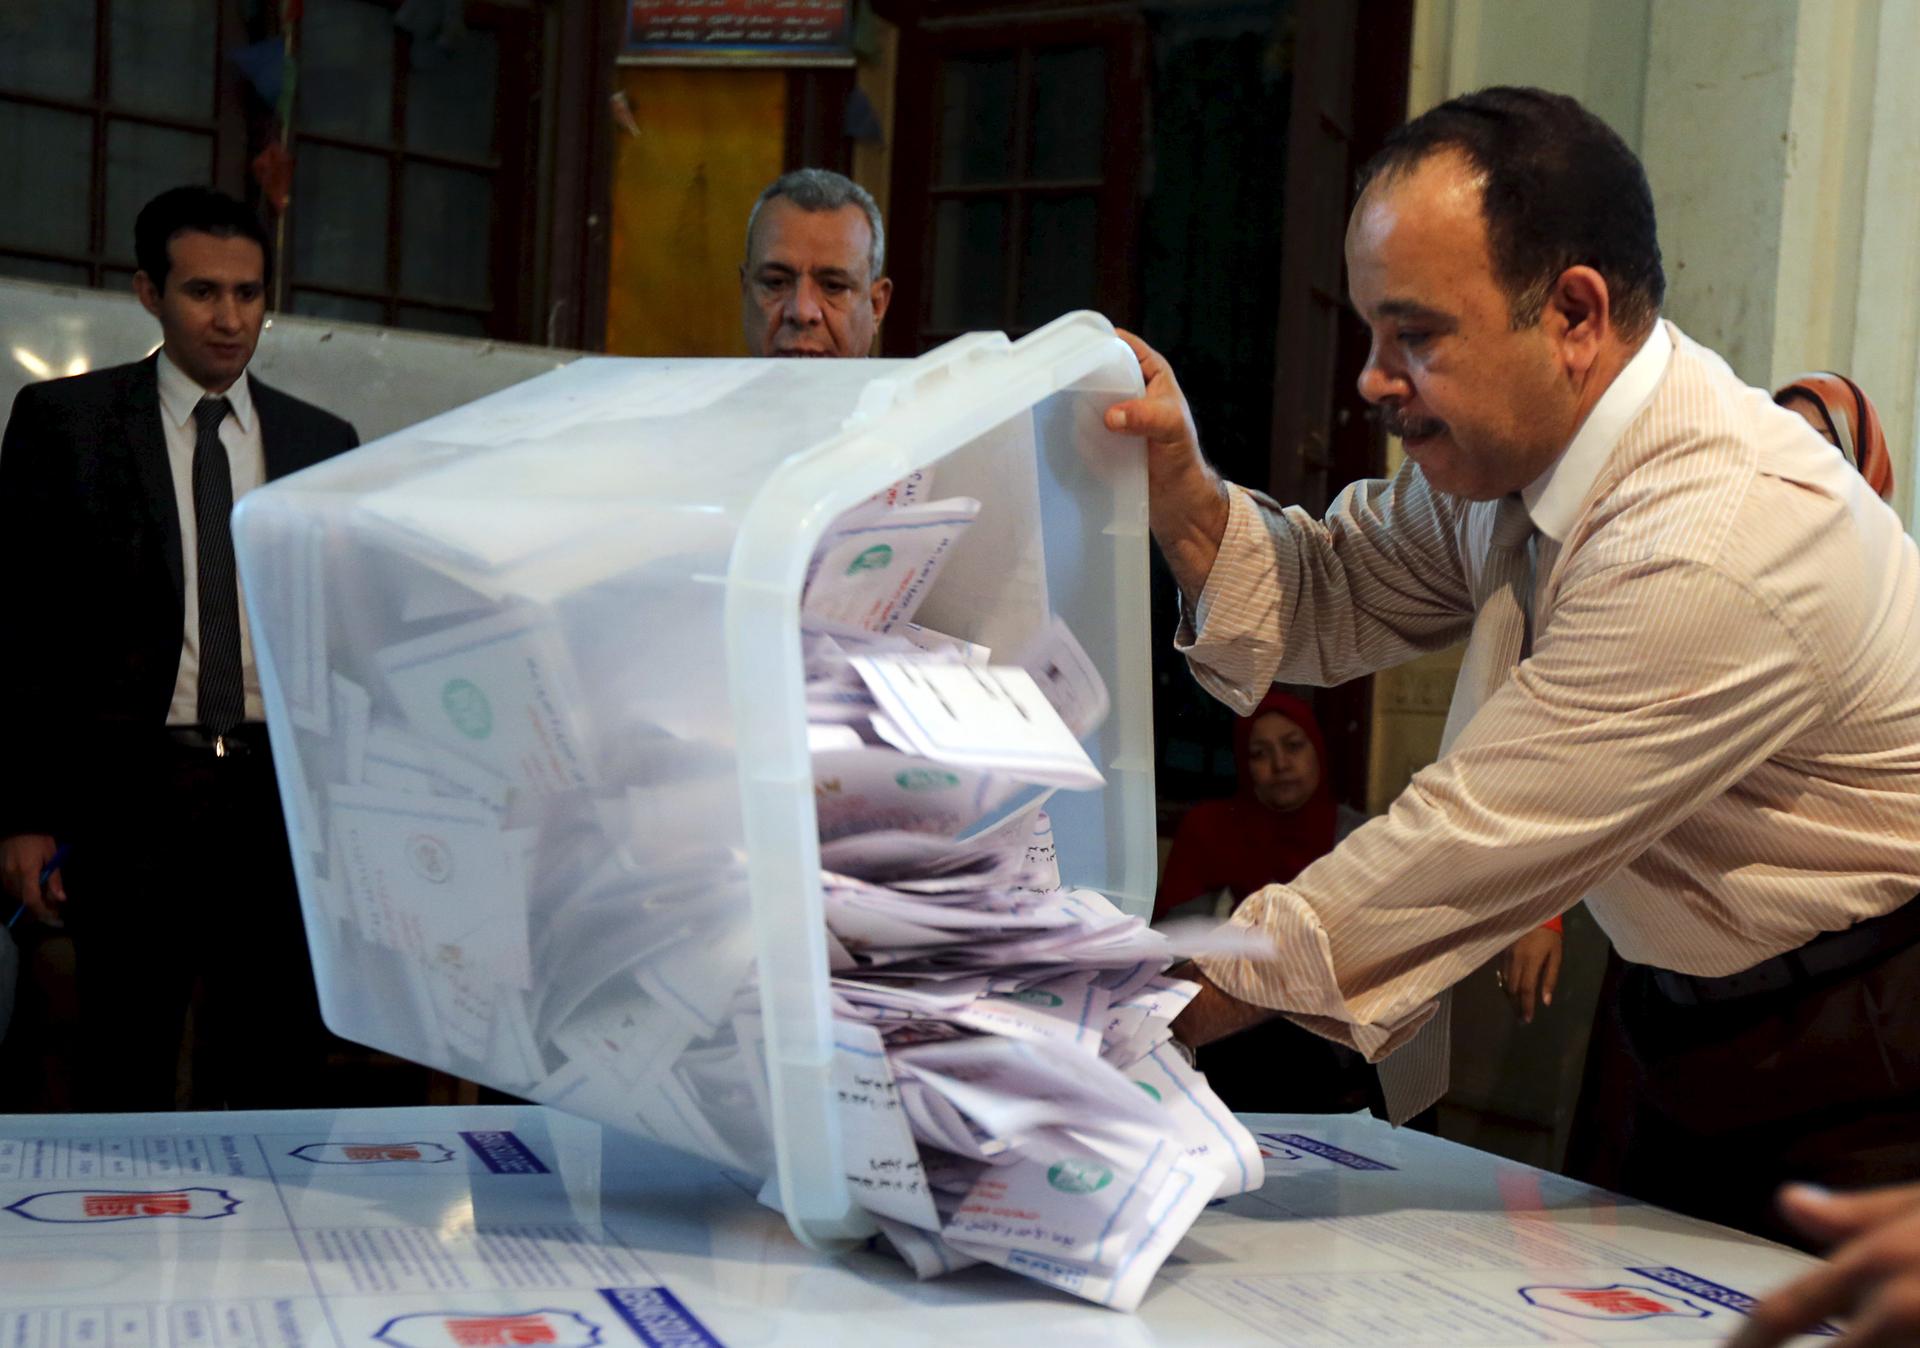 Officials count ballots after polls closed during the second round of parliamentary election in Cairo, Egypt, on Nov. 23, 2015.